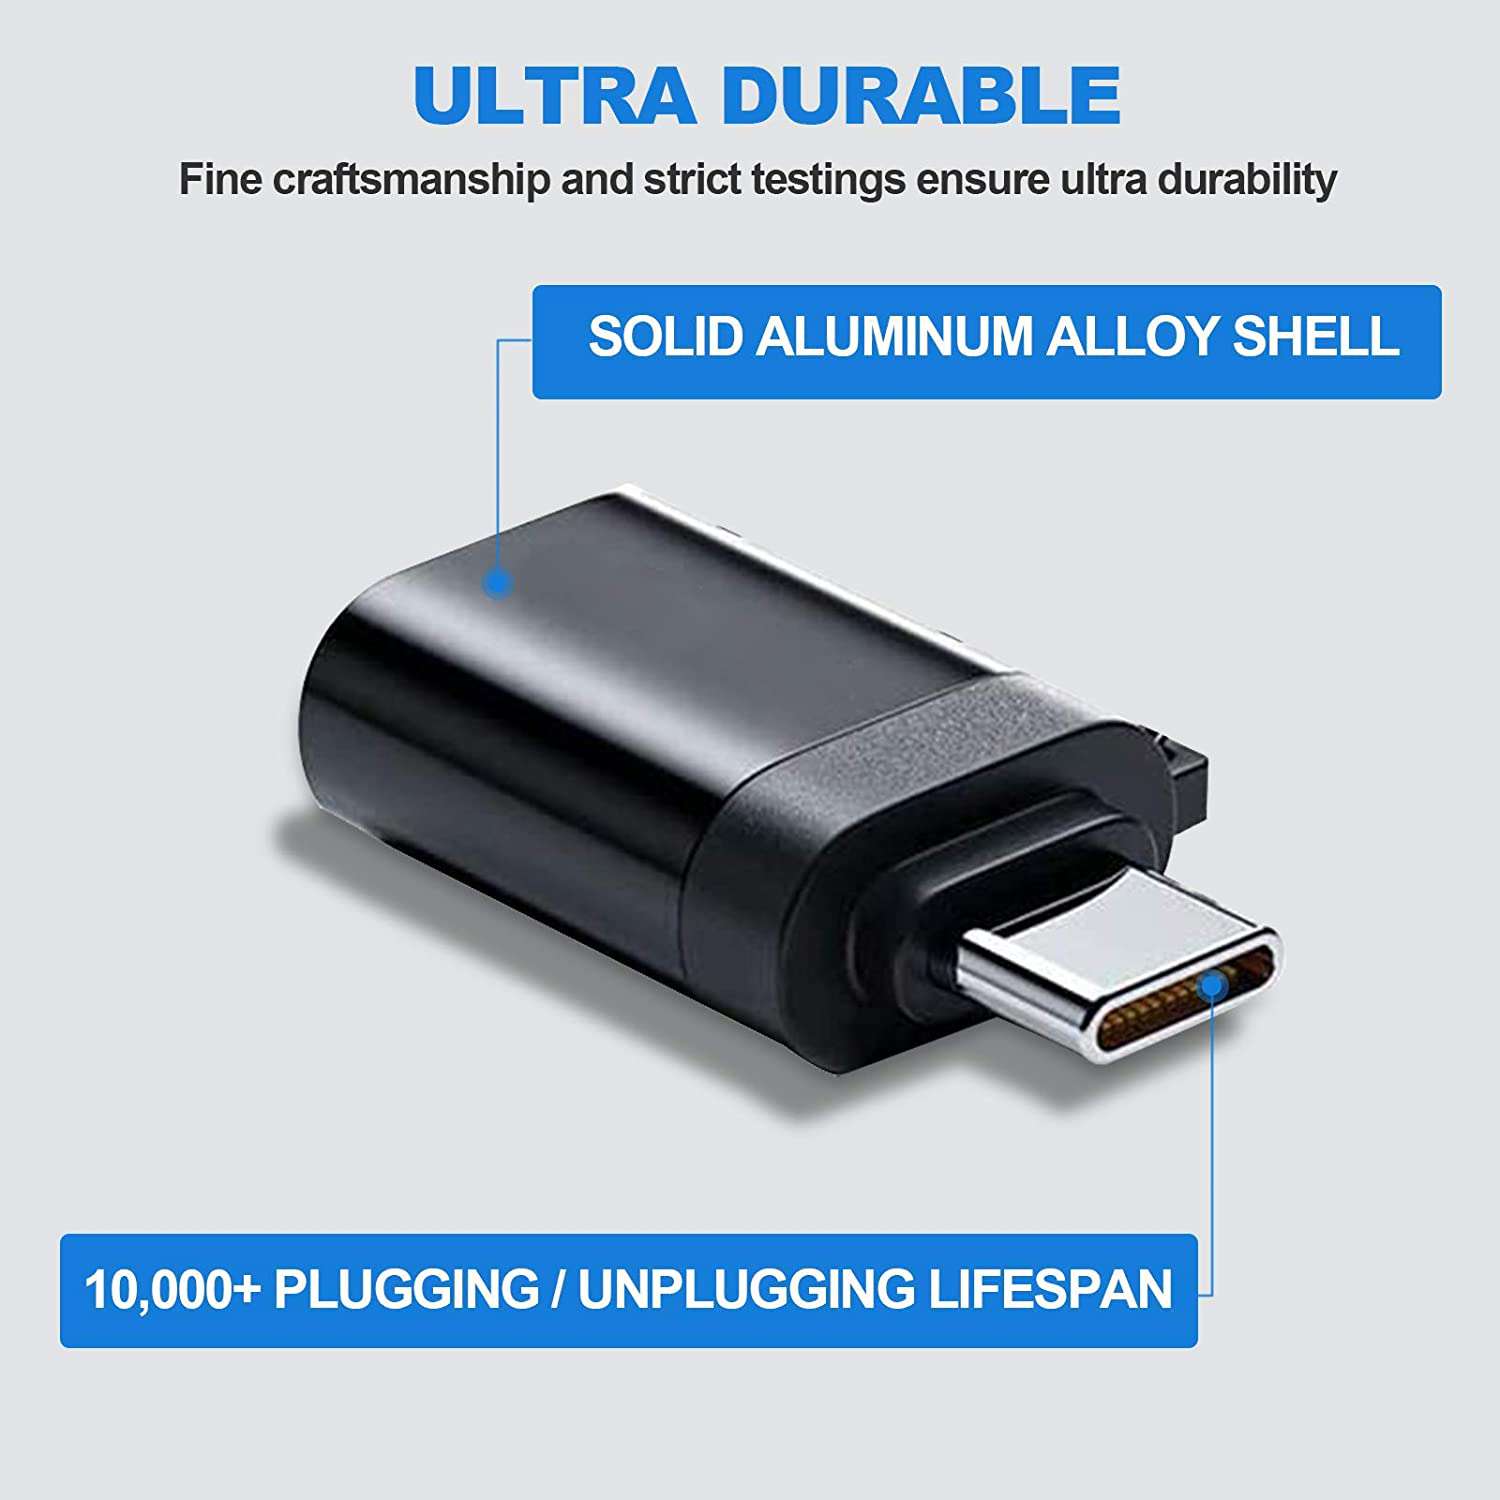 With its sturdy aluminum casing and exquisite craftsmanship, the adapter is exceptionally durable